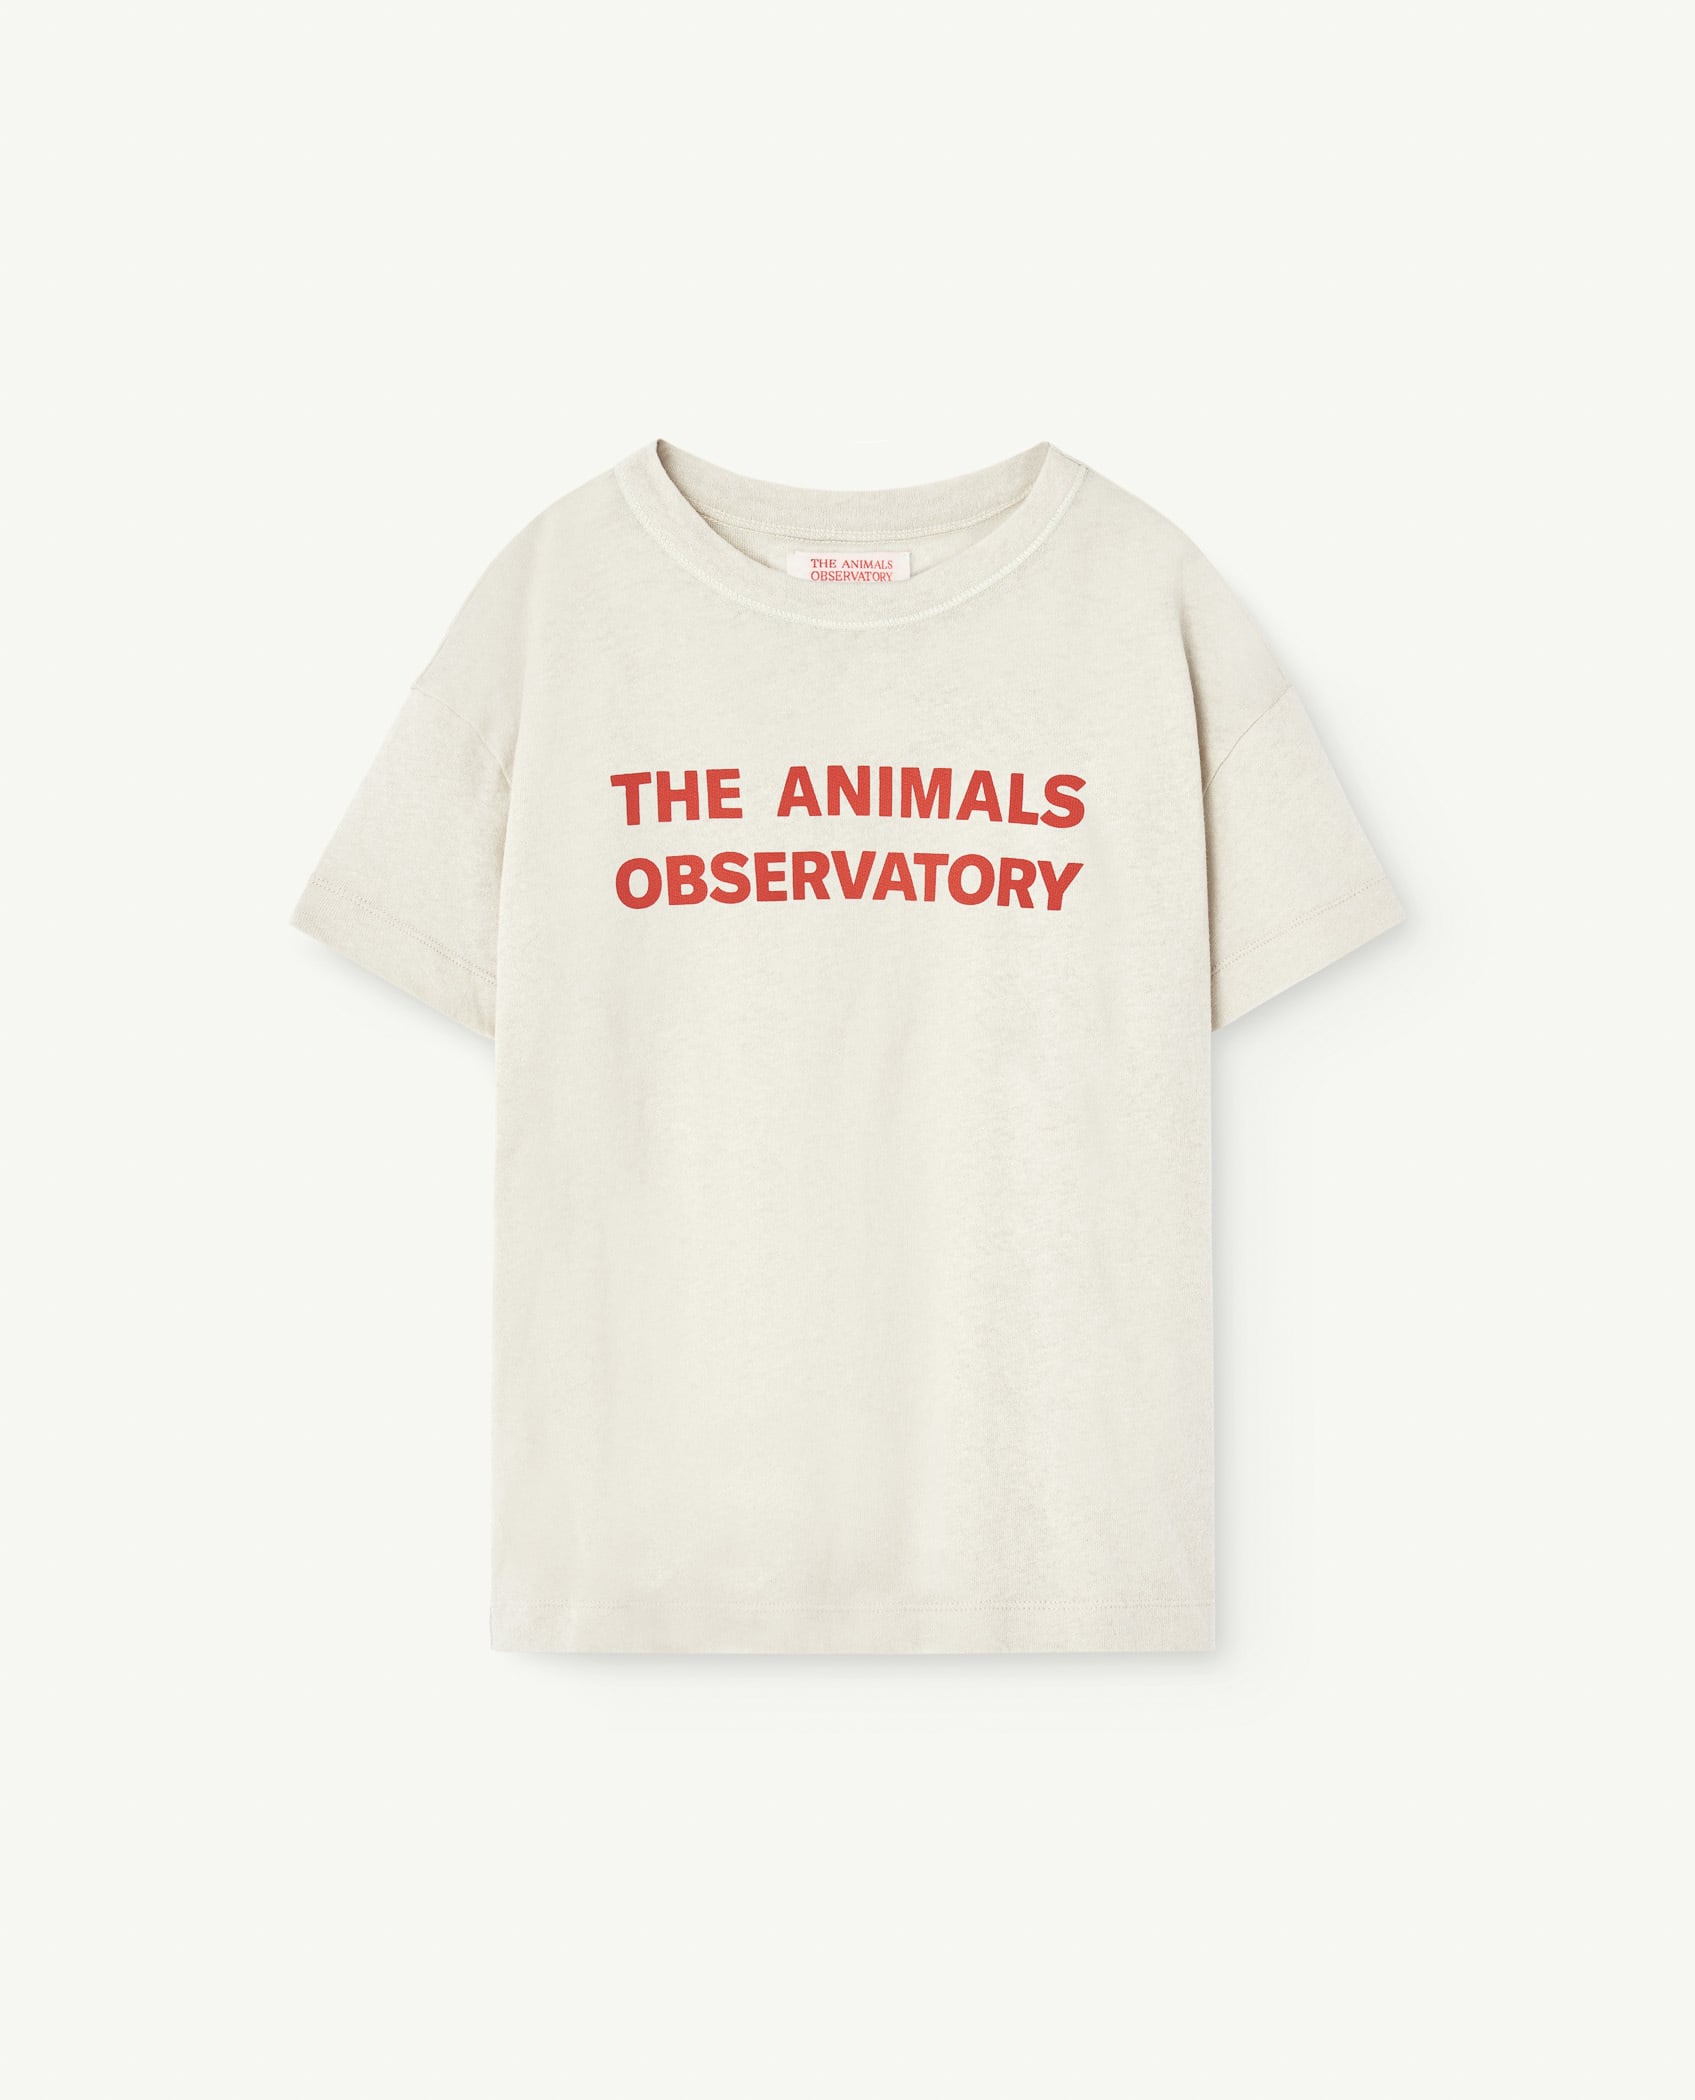 【23AW】BASIC the animals observatory ( TAO ) JERSEY TOPS ORION white Tシャツ　ロゴ  | kobito de punch/コビトデパンチ